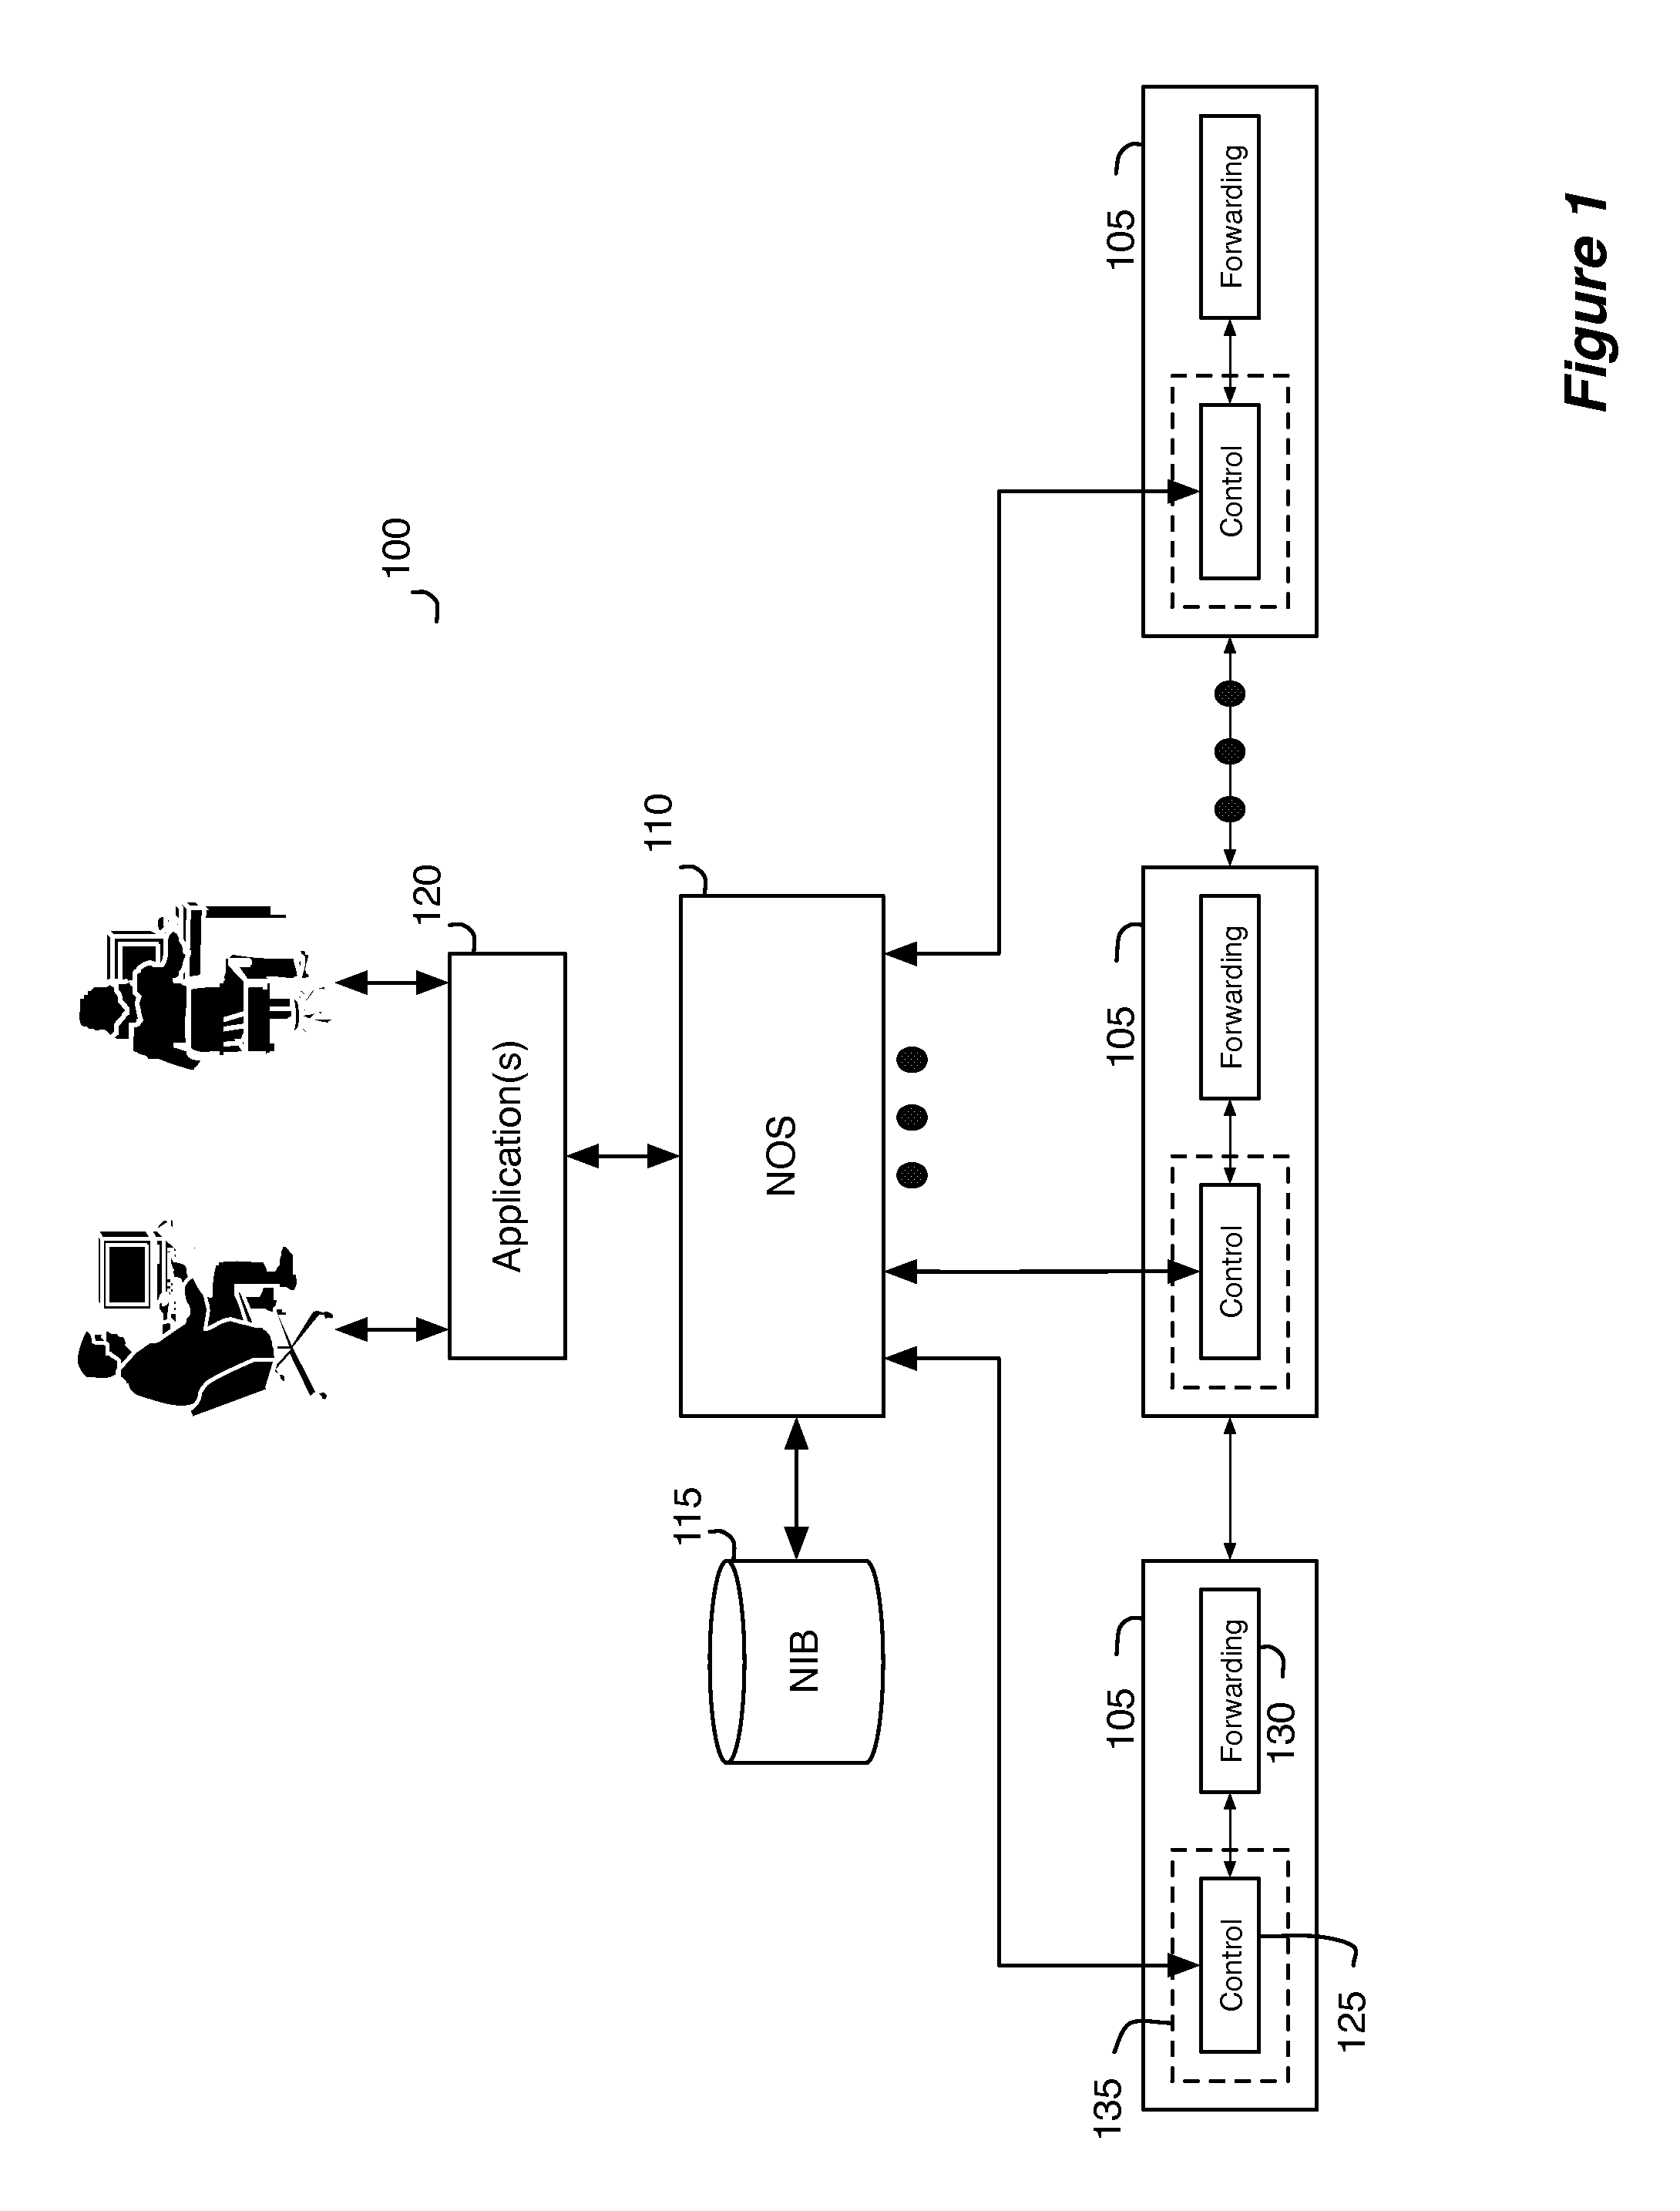 Network control apparatus and method for port isolation